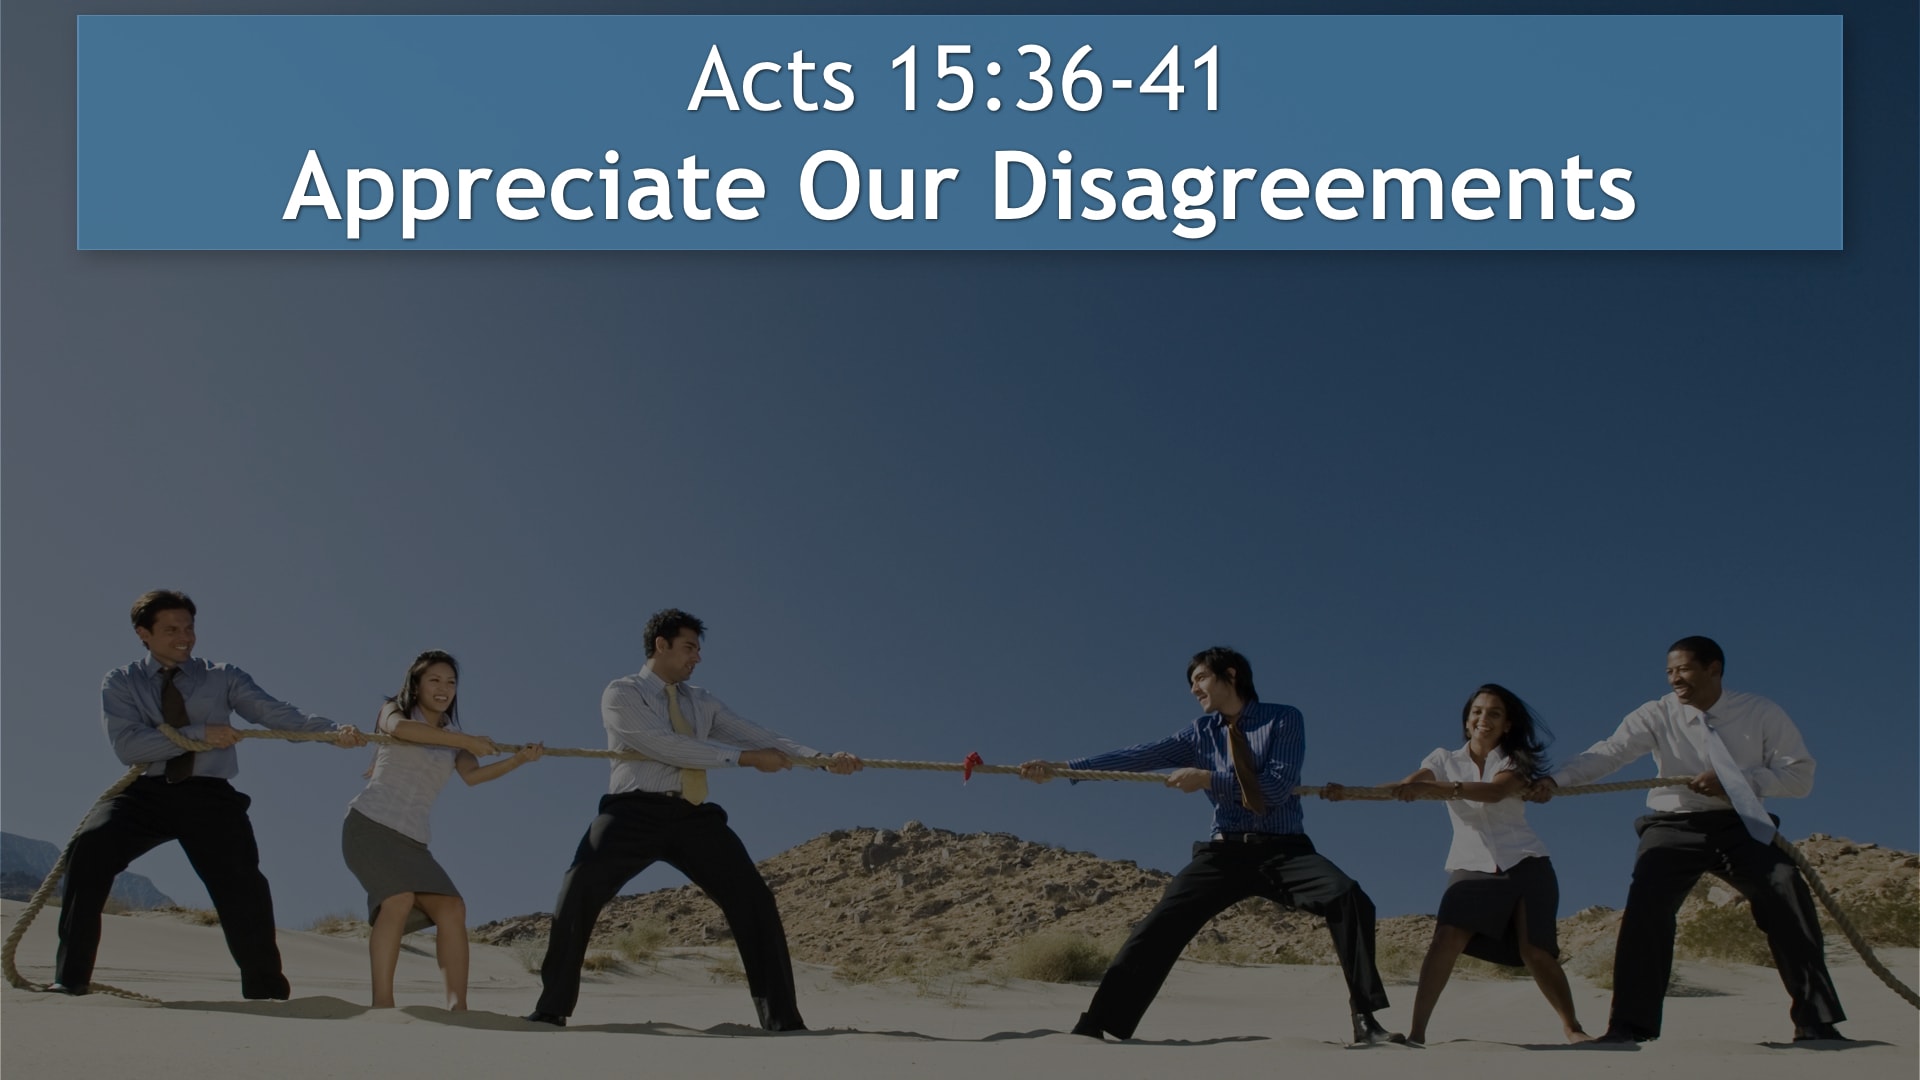 Jerry Simmons teaching Acts 15:36-41, Appreciate Our Disagreements